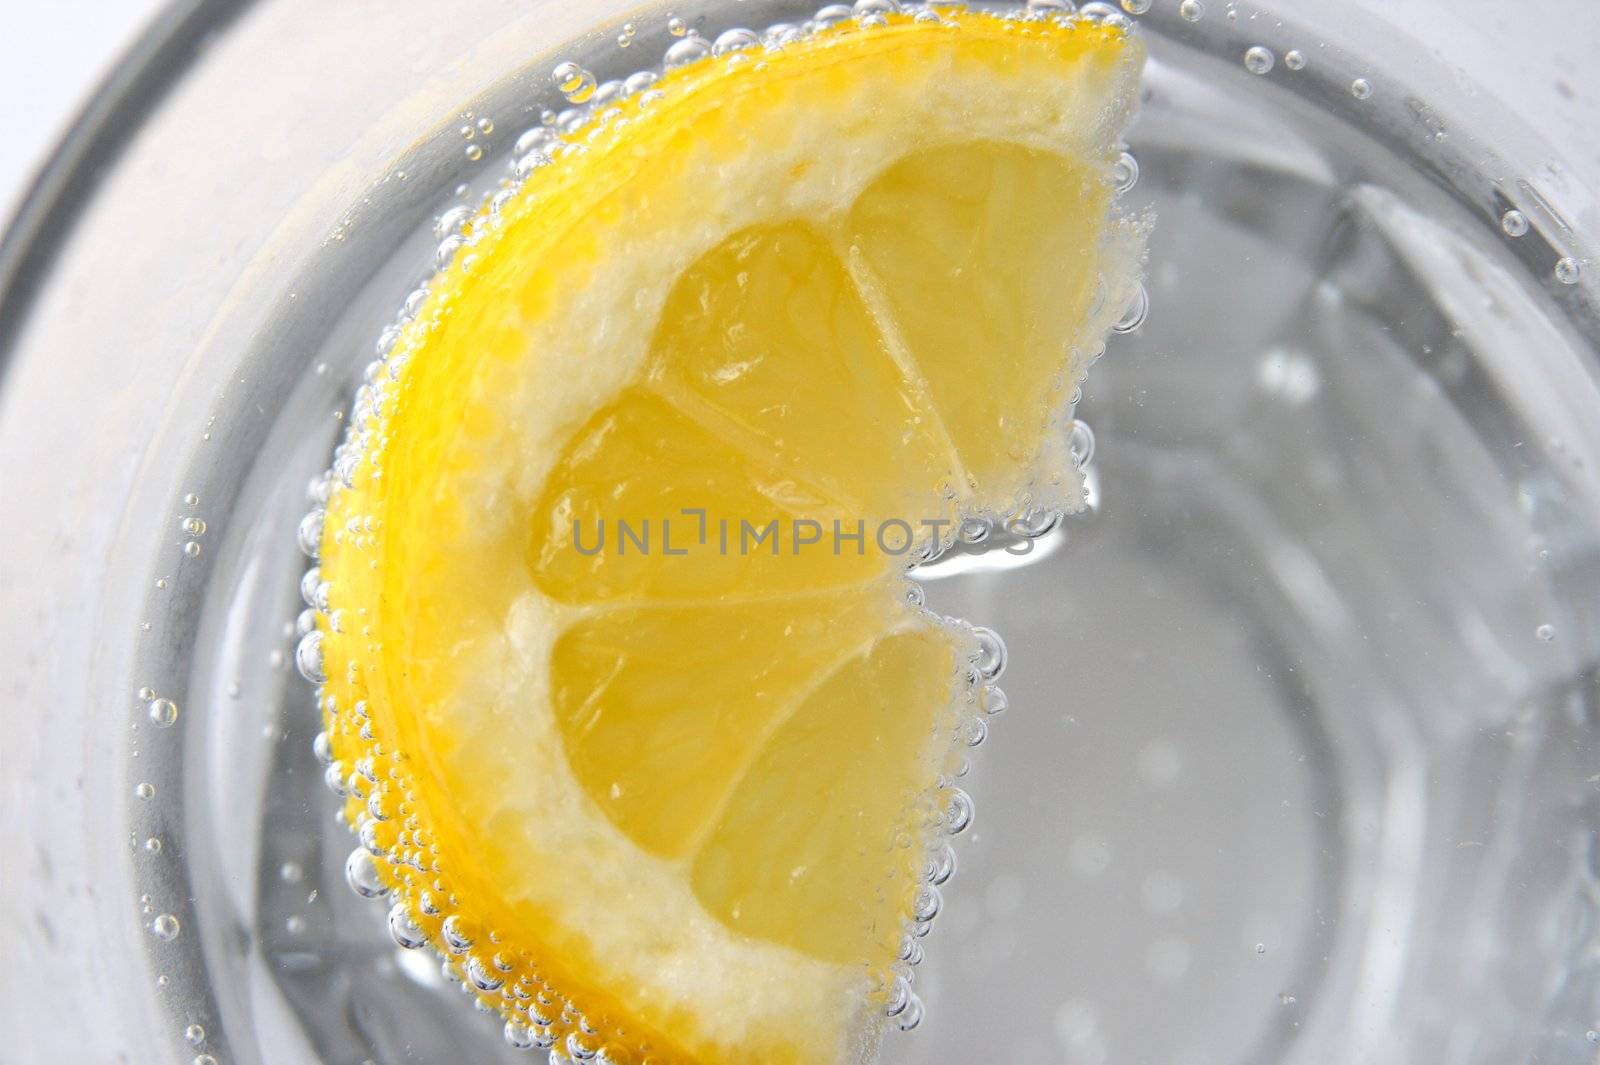 A slice  of lemon in sparkling mineral water